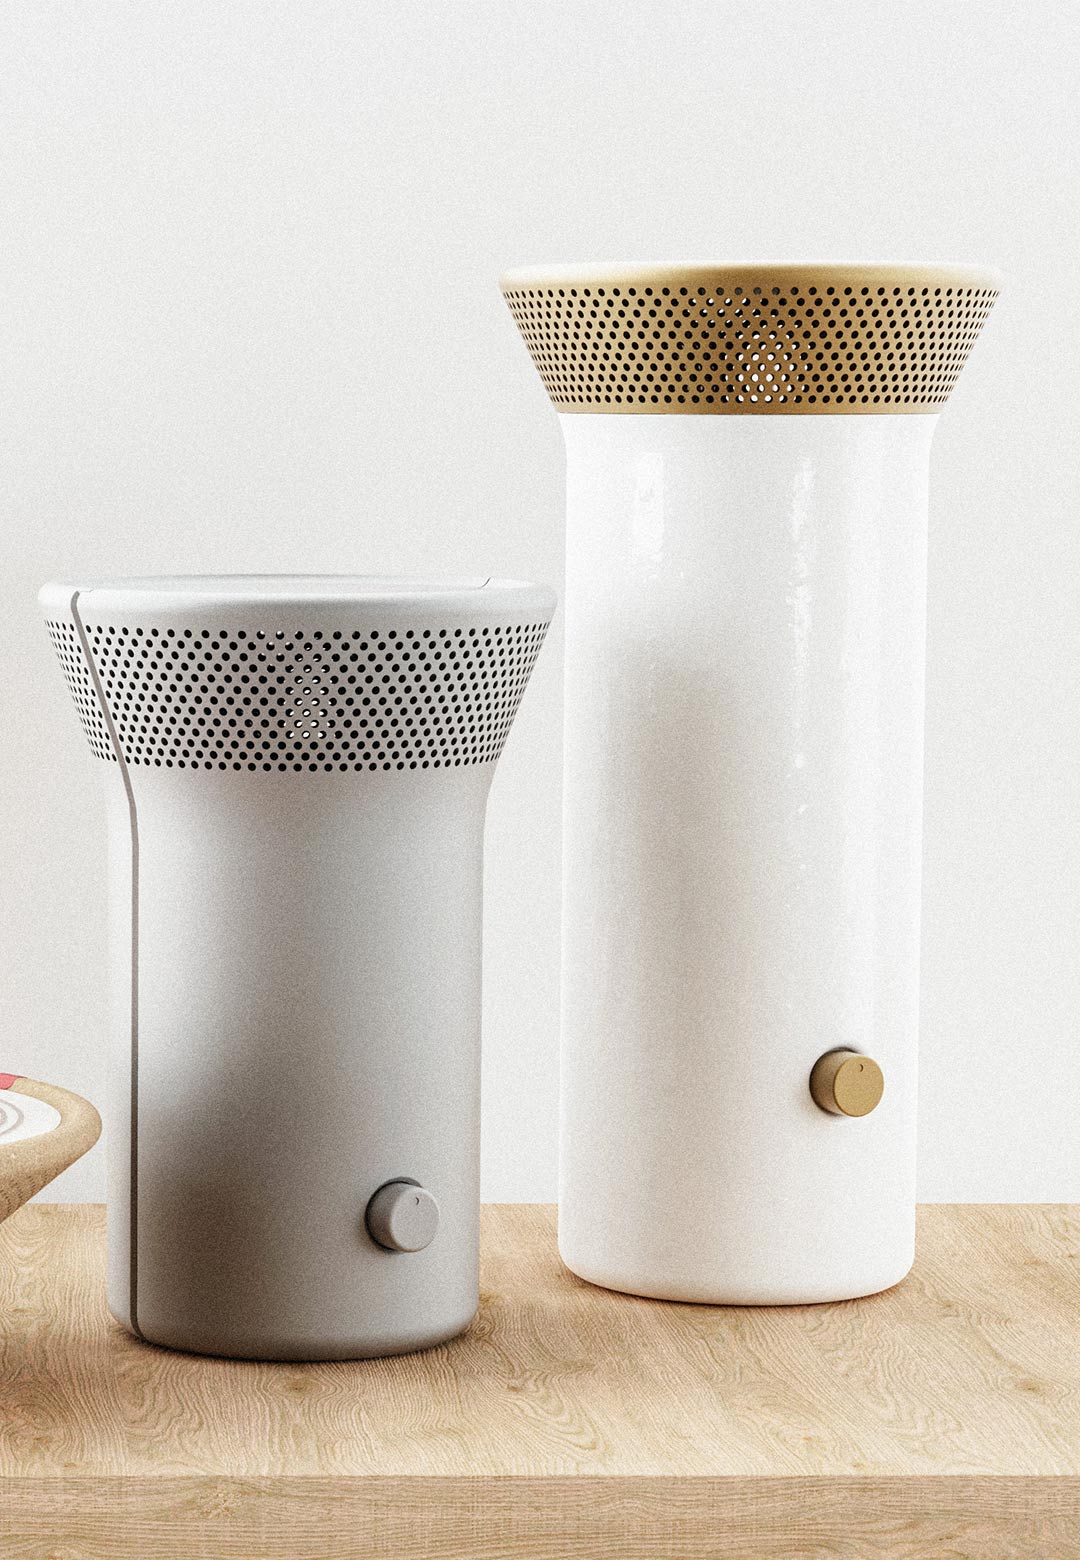 FROLIC Studio’s smart speakers are attuned to four types of sustainable design facets